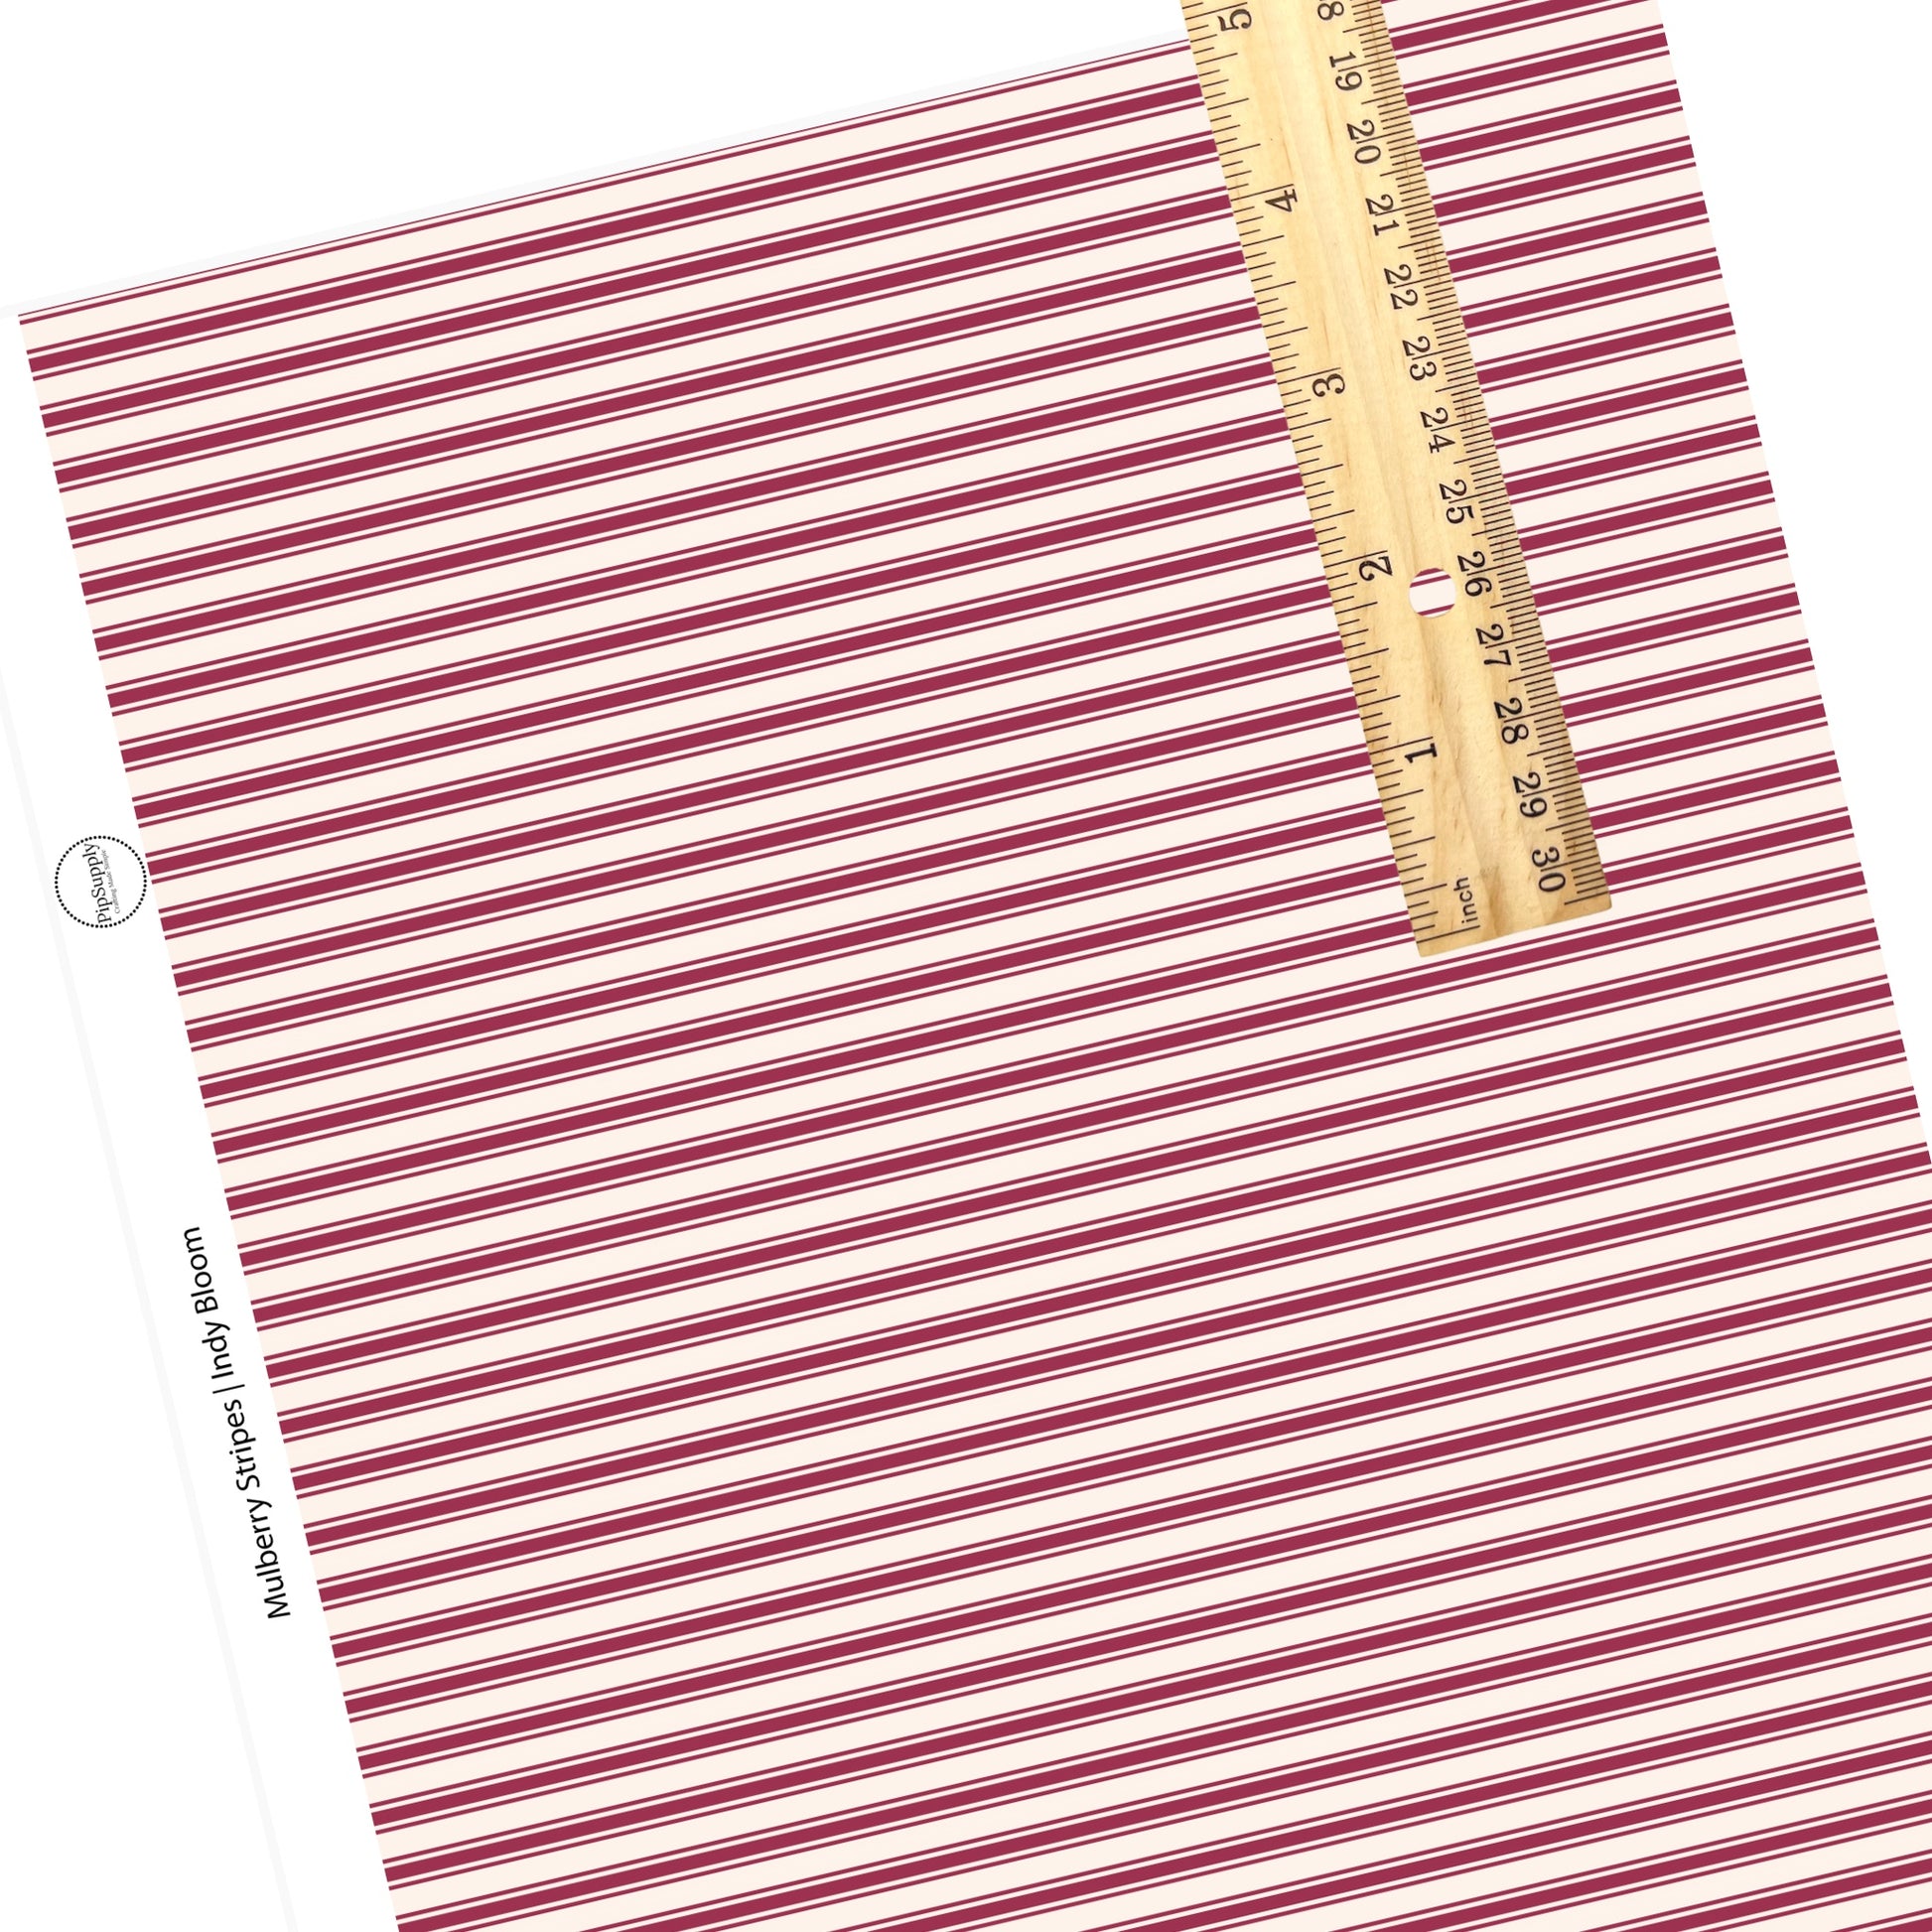 These stripe themed faux leather sheets contain the following design elements: mulberry thin and thick stripes on cream. Our CPSIA compliant faux leather sheets or rolls can be used for all types of crafting projects.